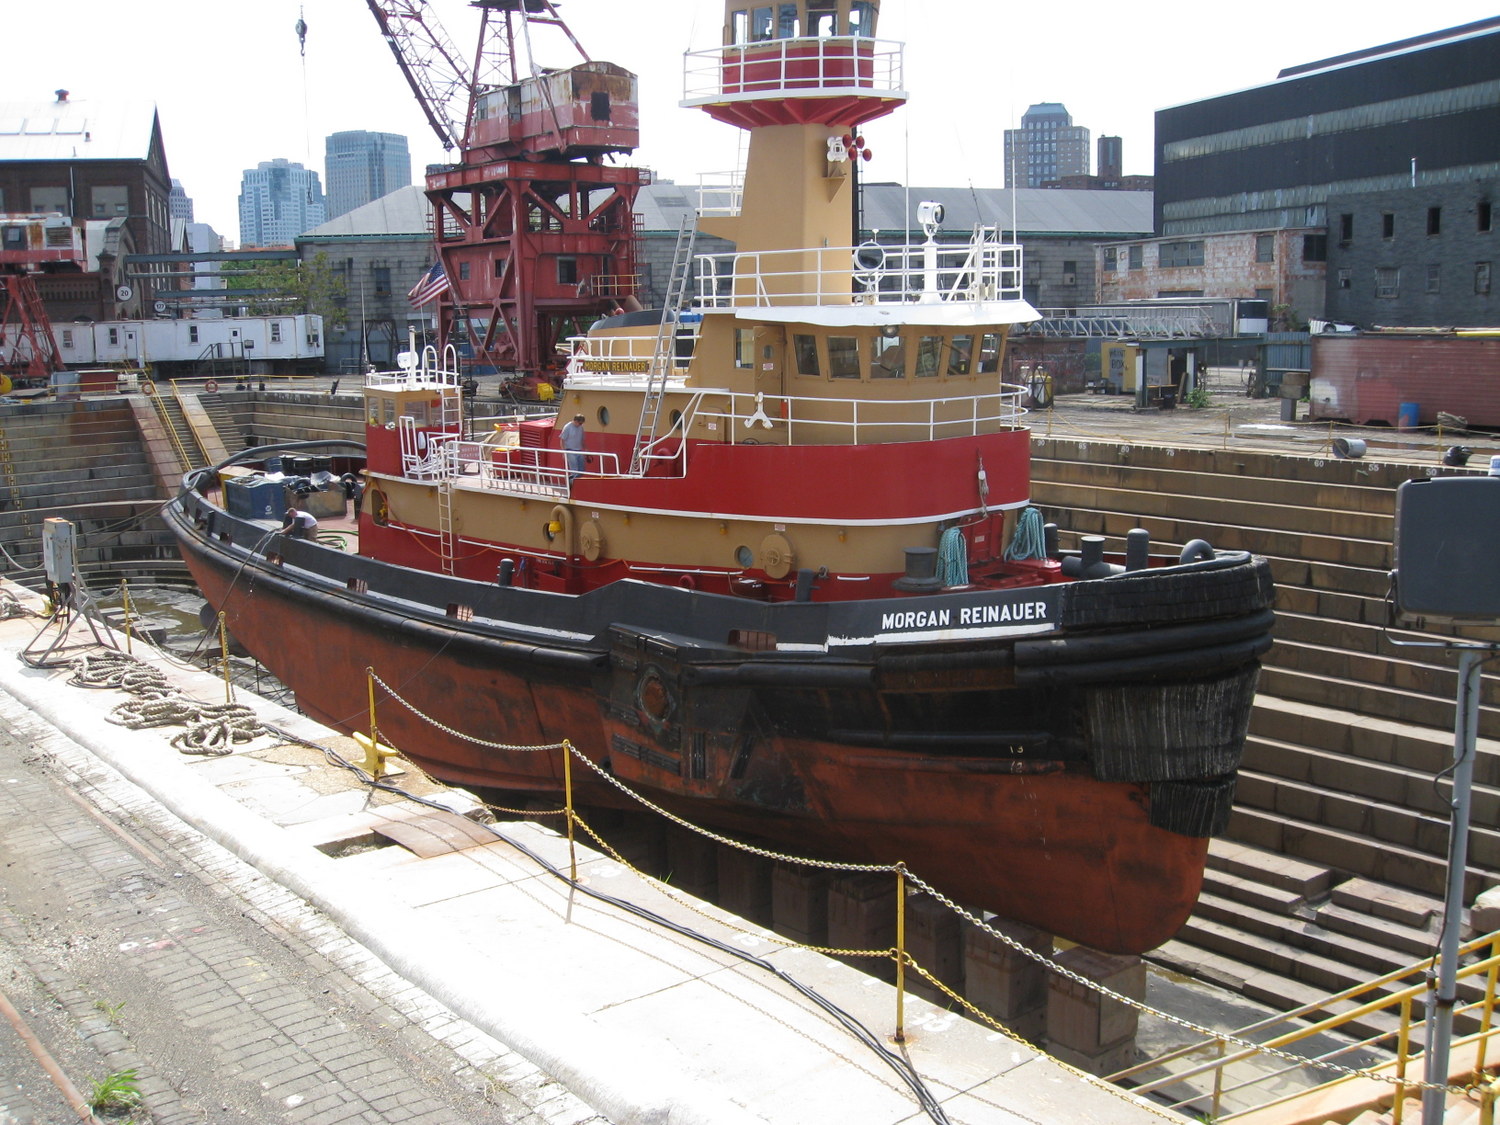 Tugboat in Dry Dock 1 at the Brooklyn Navy Yard